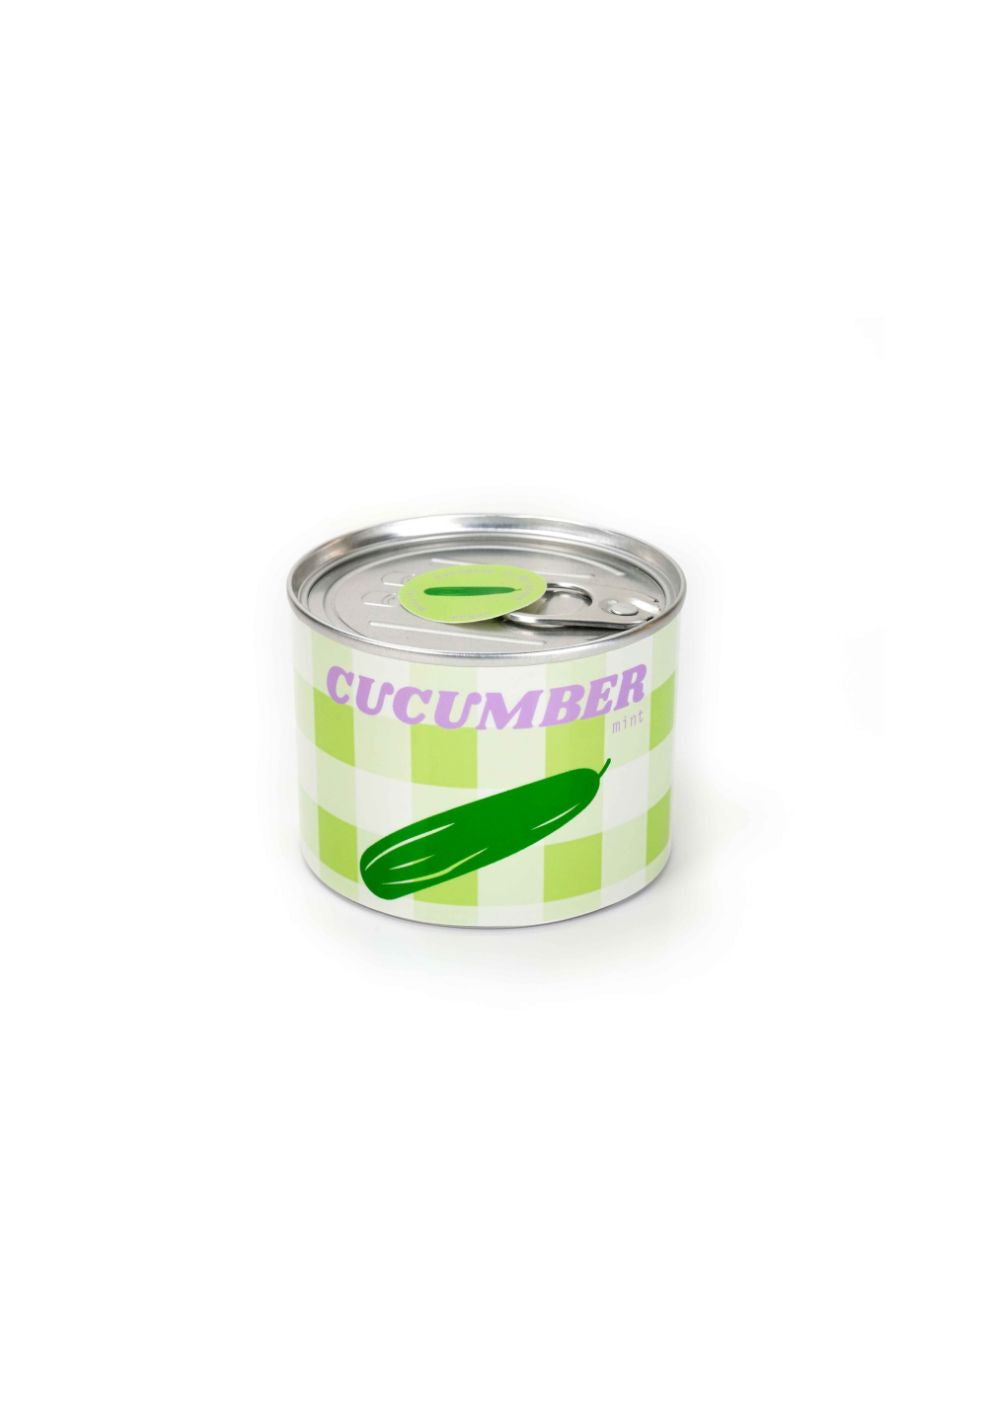 Cucumber & Mint Mercado Scented Candle